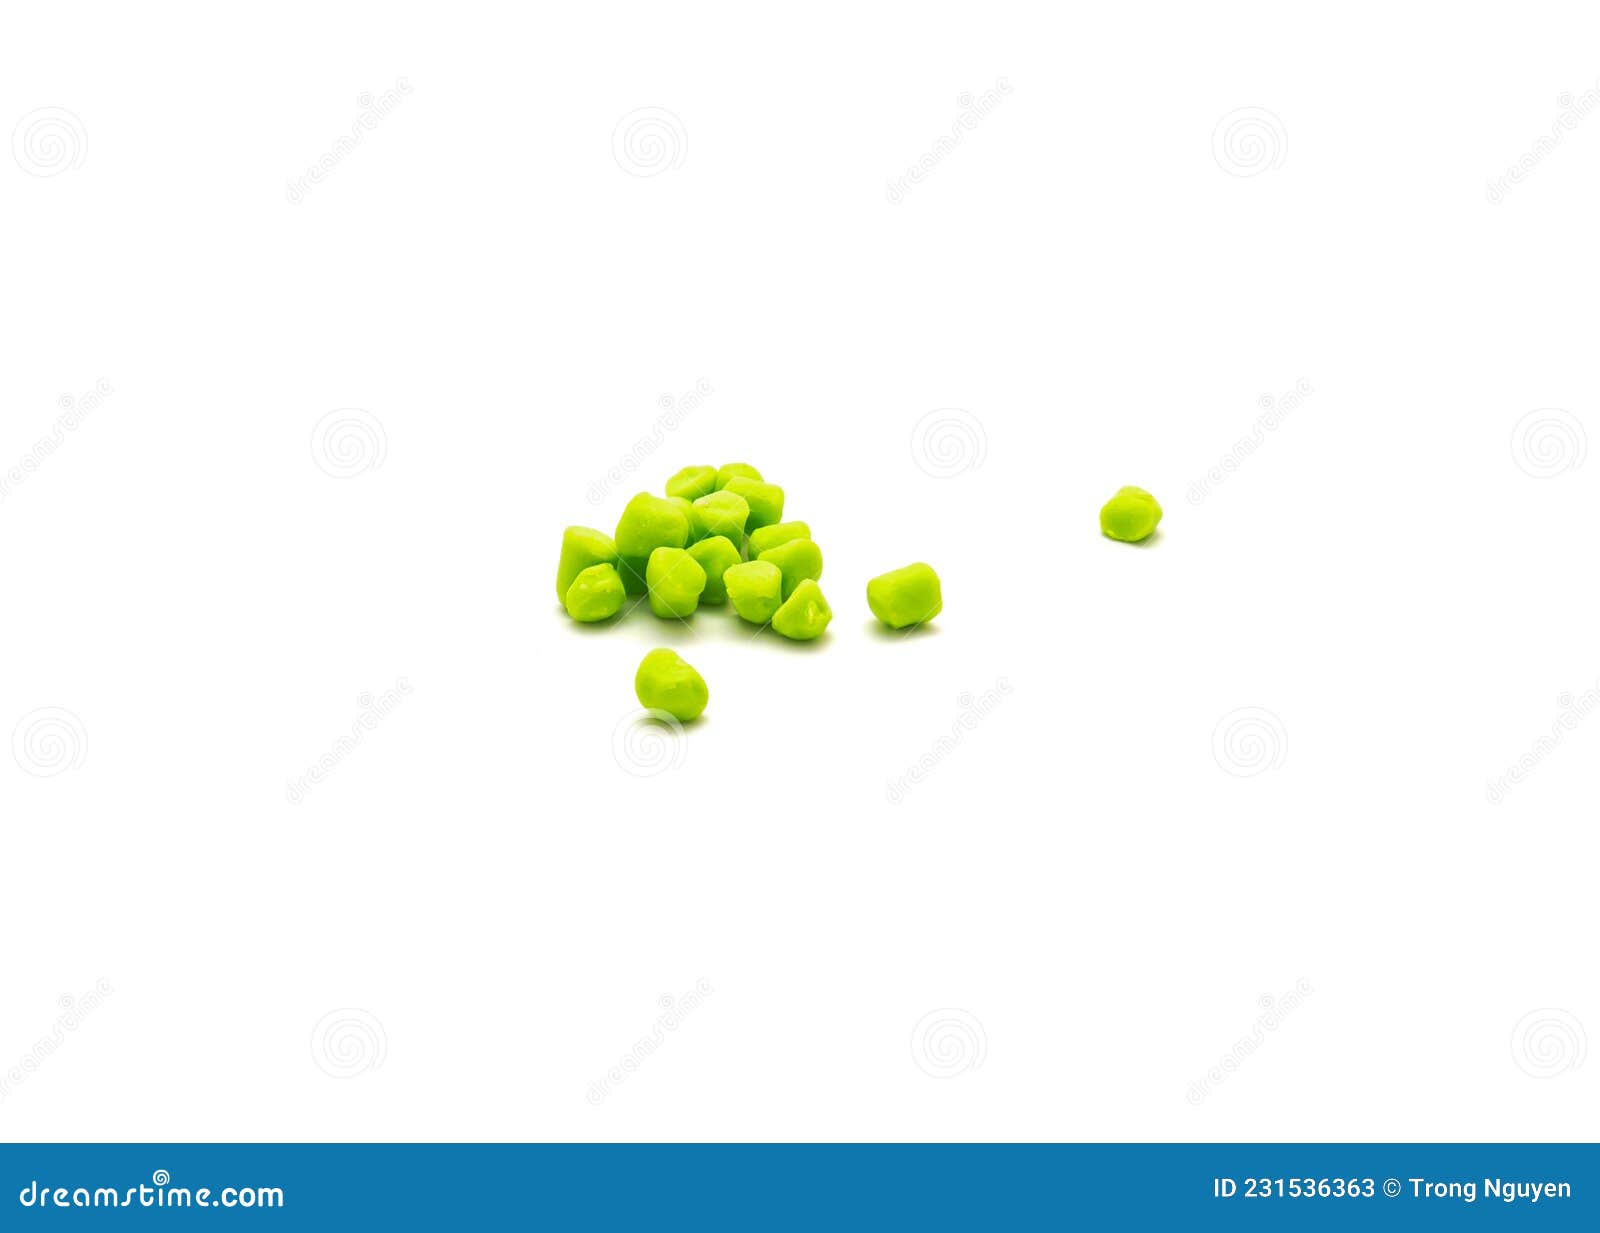 Chartreuse Color Crappie Bites Isolated on White Background Stock